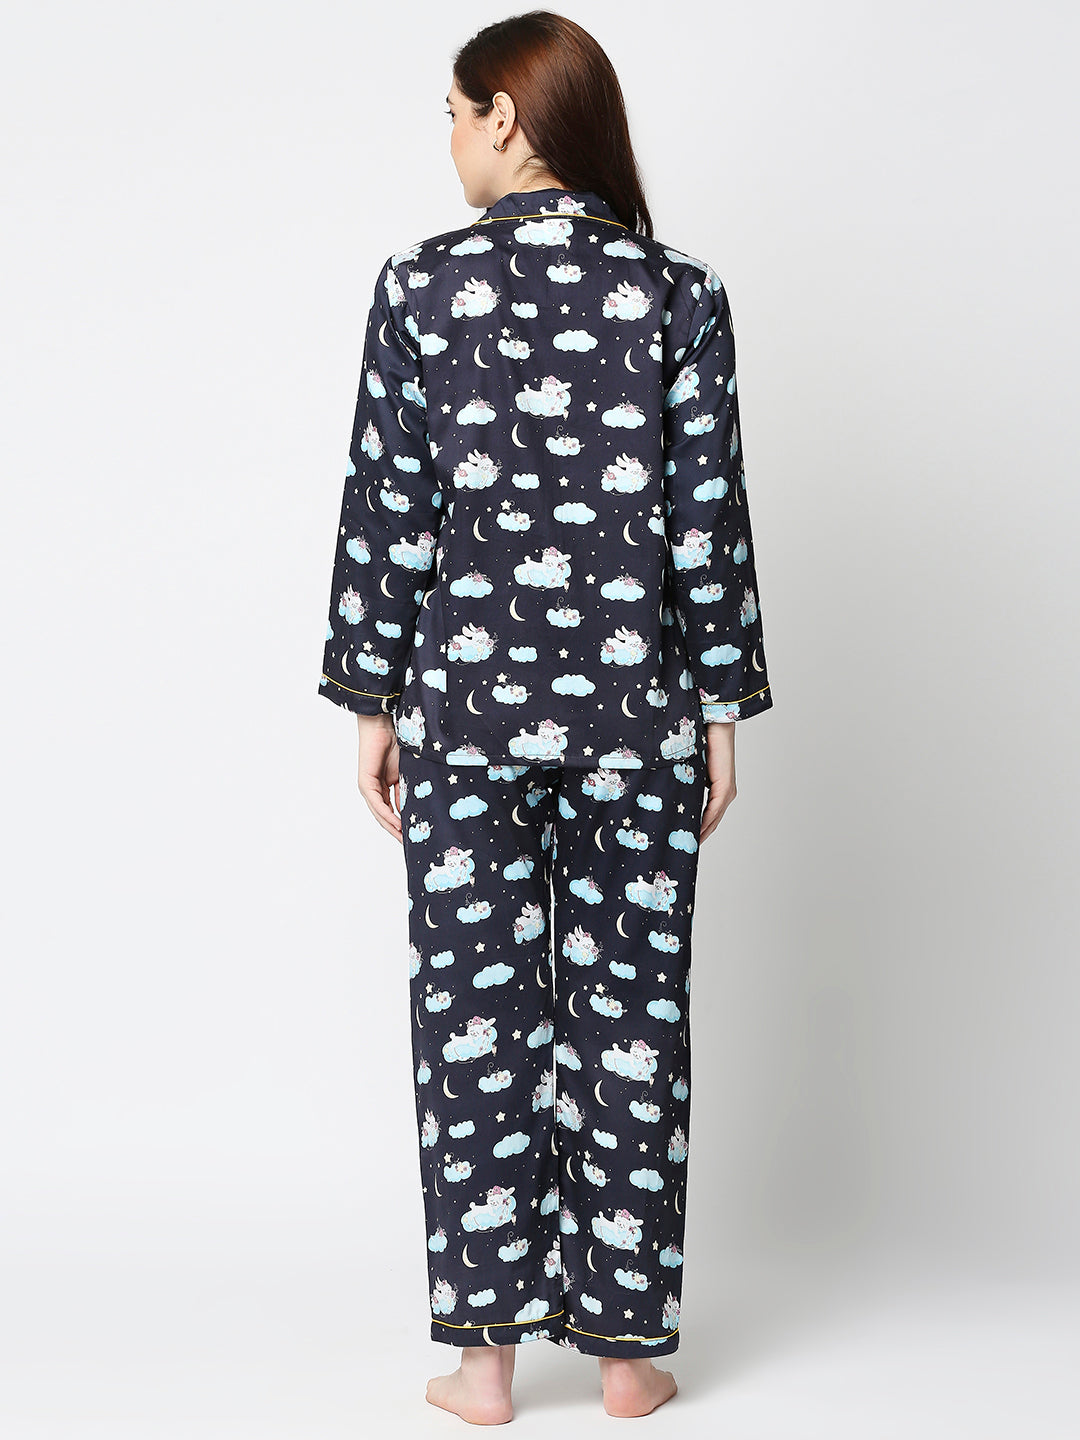 Bunny In The Cloud Button Down Pj Set - Pure Cotton Pj Set with Notched Collar